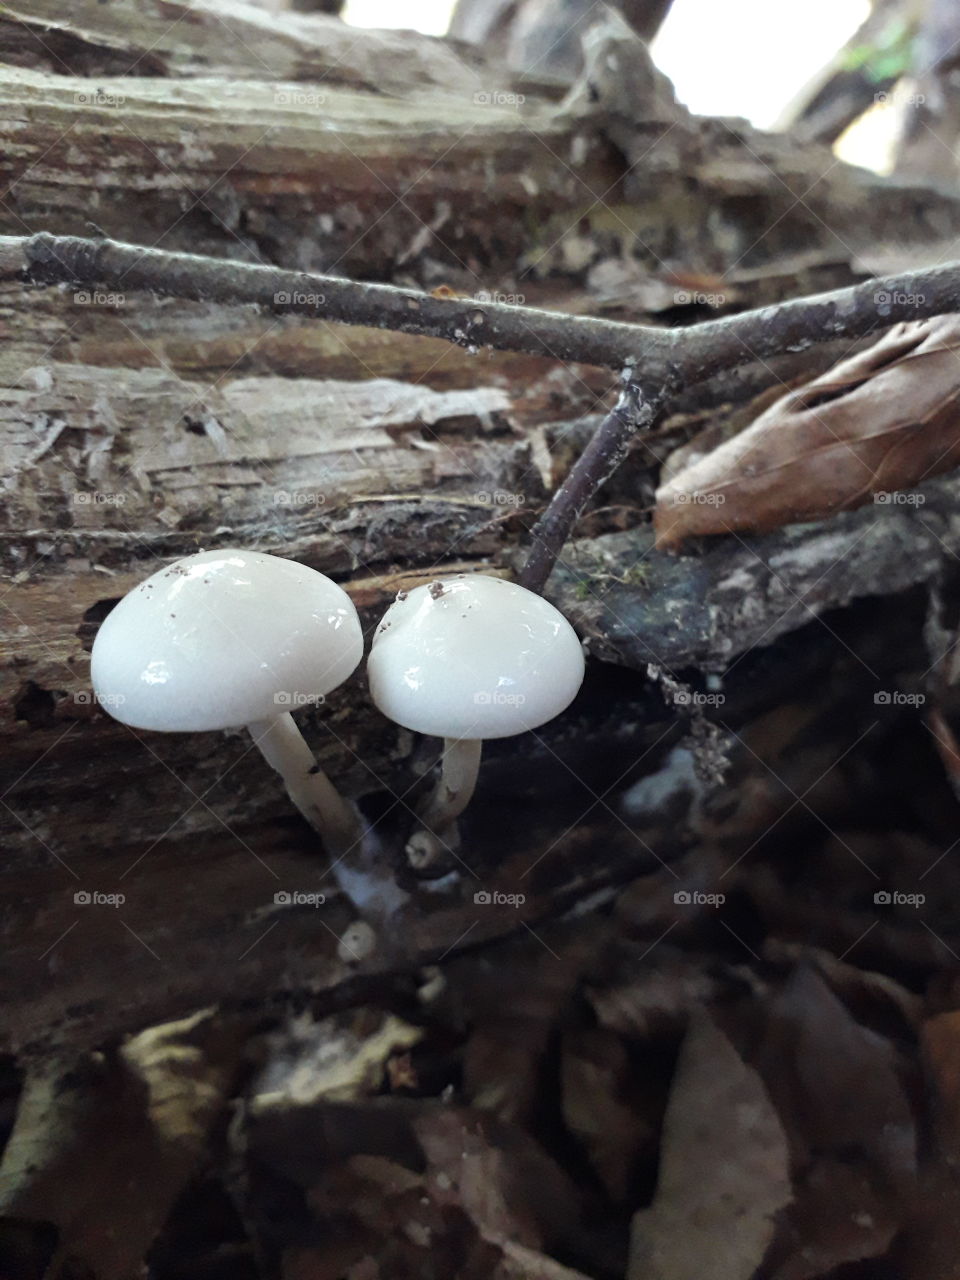 Crystal Mushrooms growing from a piece of rotting wood